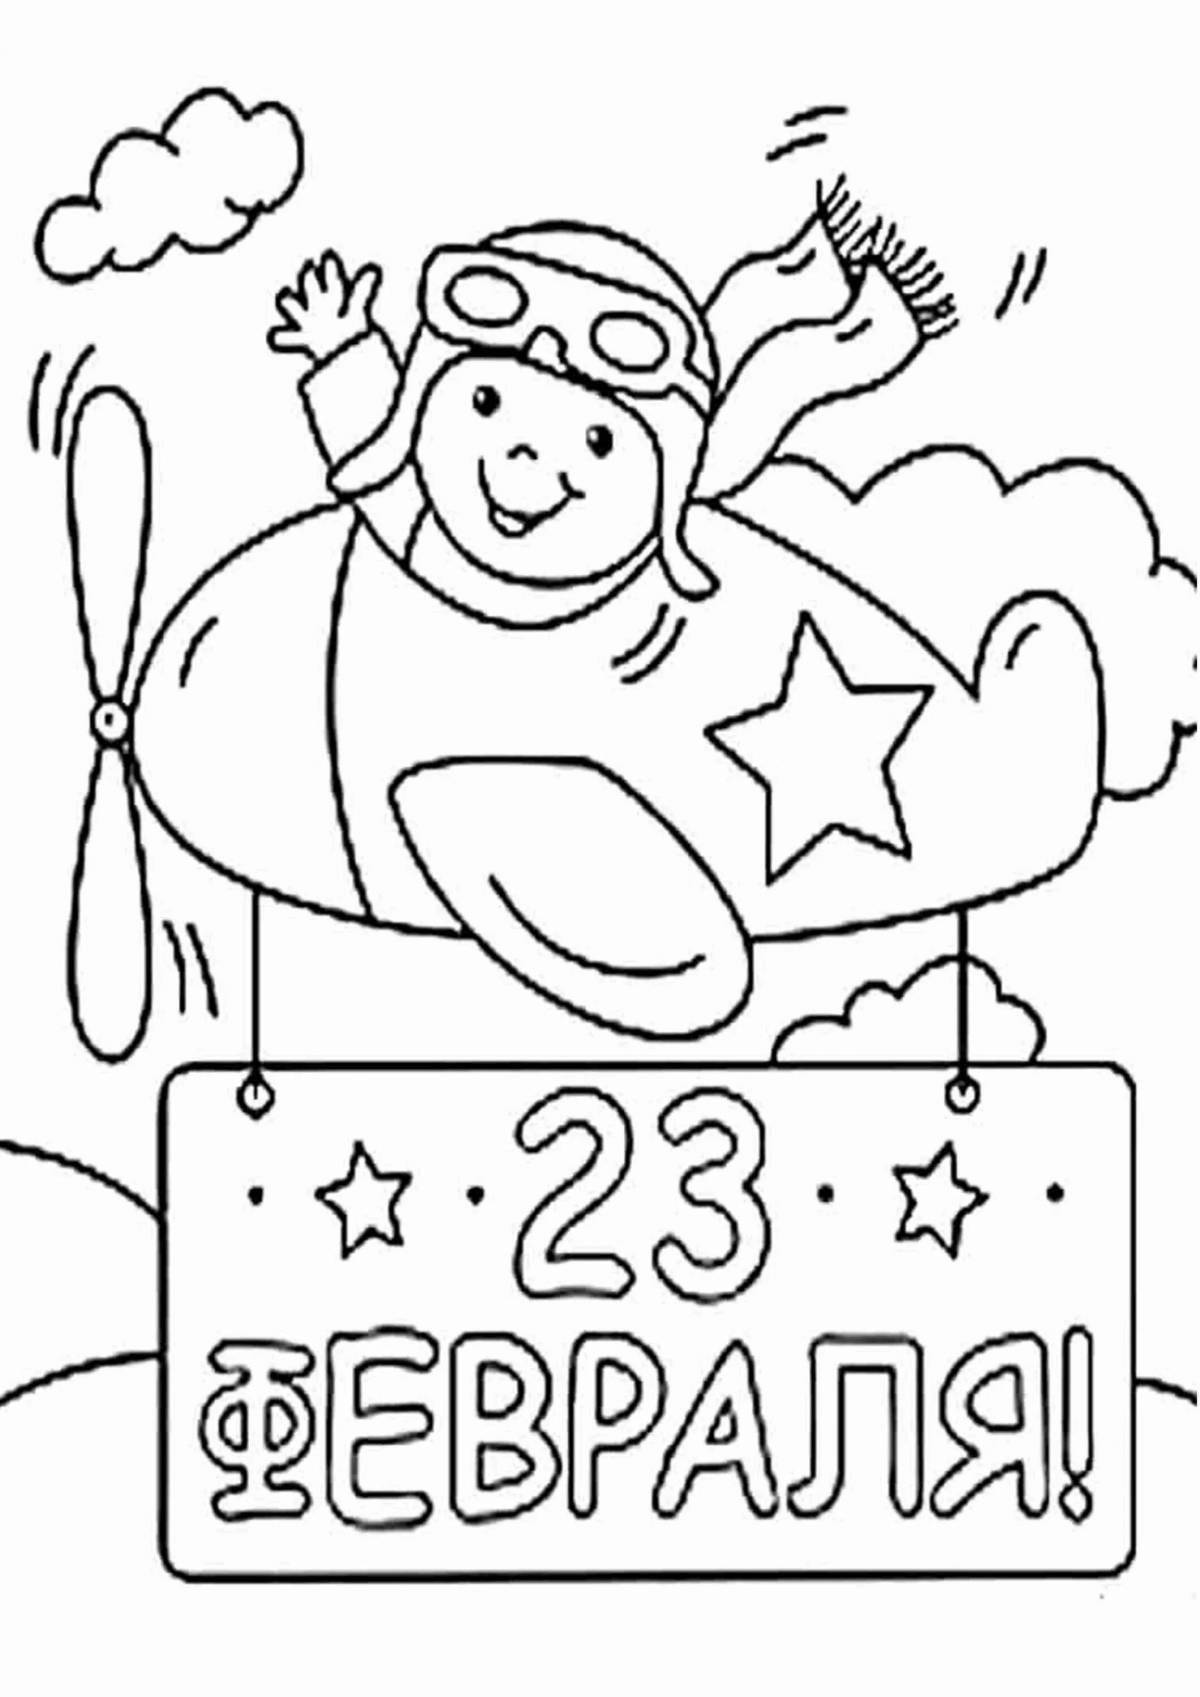 Playful coloring page Happy February 23rd